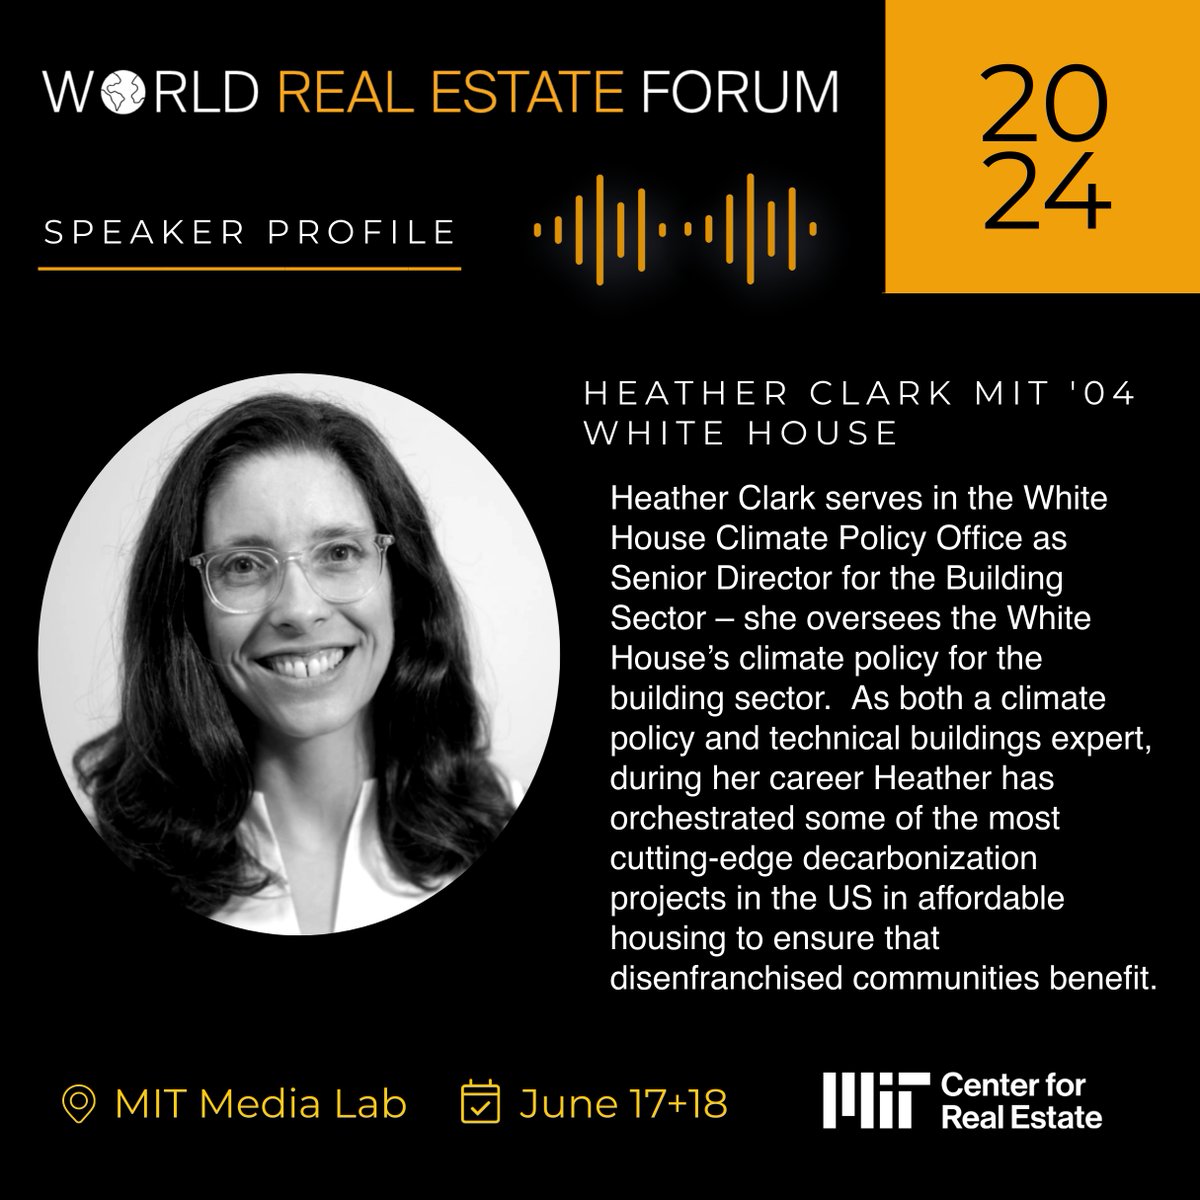 ⭐️ Heather T. Clark, Senior Director for the Building Sector in @POTUS #WhiteHouse Climate Policy Office, will keynote the #MITWorldREForum June 17+18! With expertise in #climatepolicy and building solutions, she leads groundbreaking #decarbonization projects nationwide.